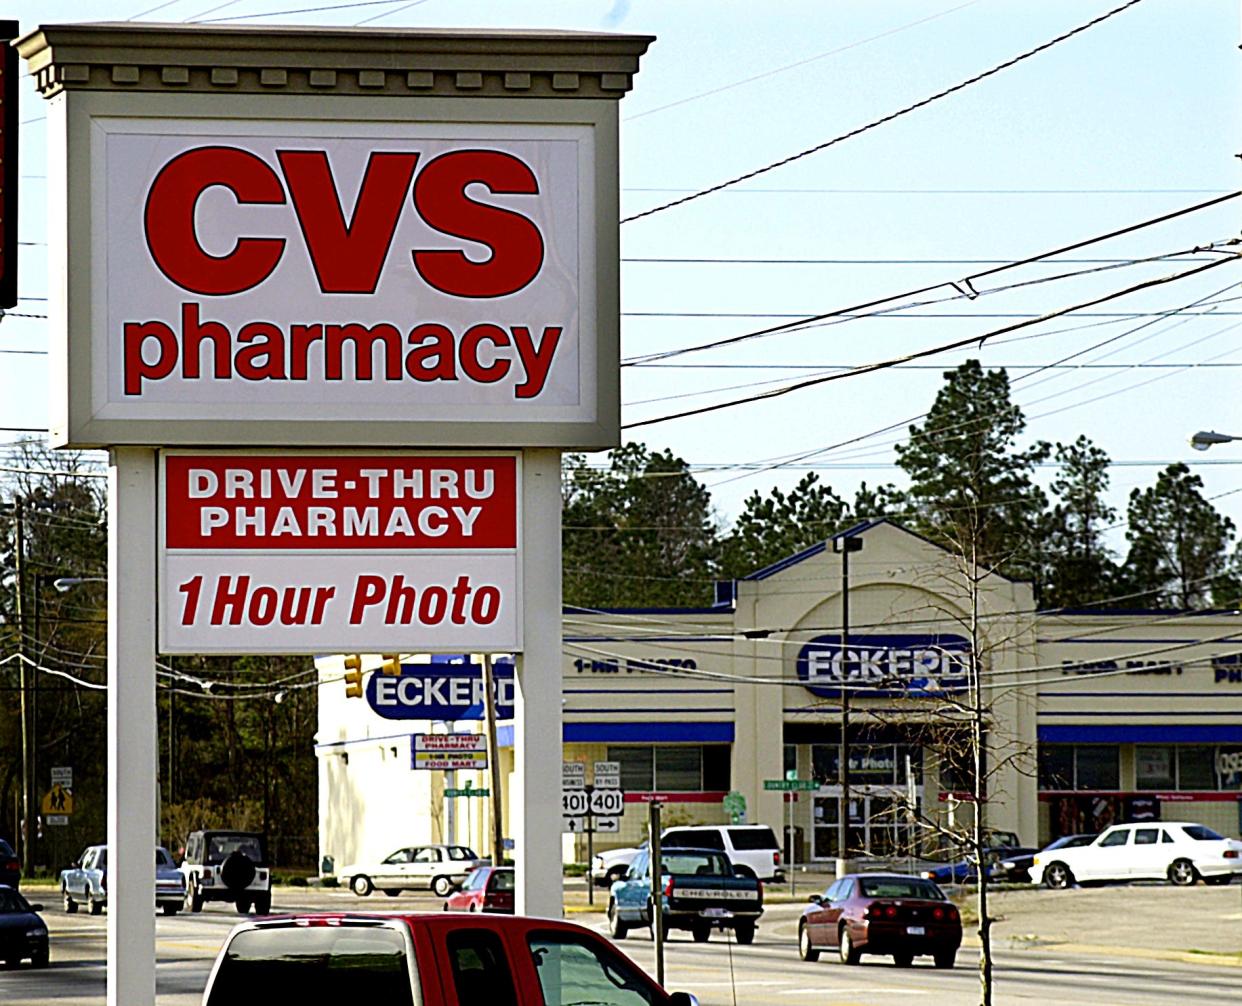 A CVS on Ramsey Street and Eckerd Drug on Country Club Drive in north Fayetteville, NC, are shown in this photo from 2000. Rite Aid bought out Eckerd in 2006. 

Biz story.